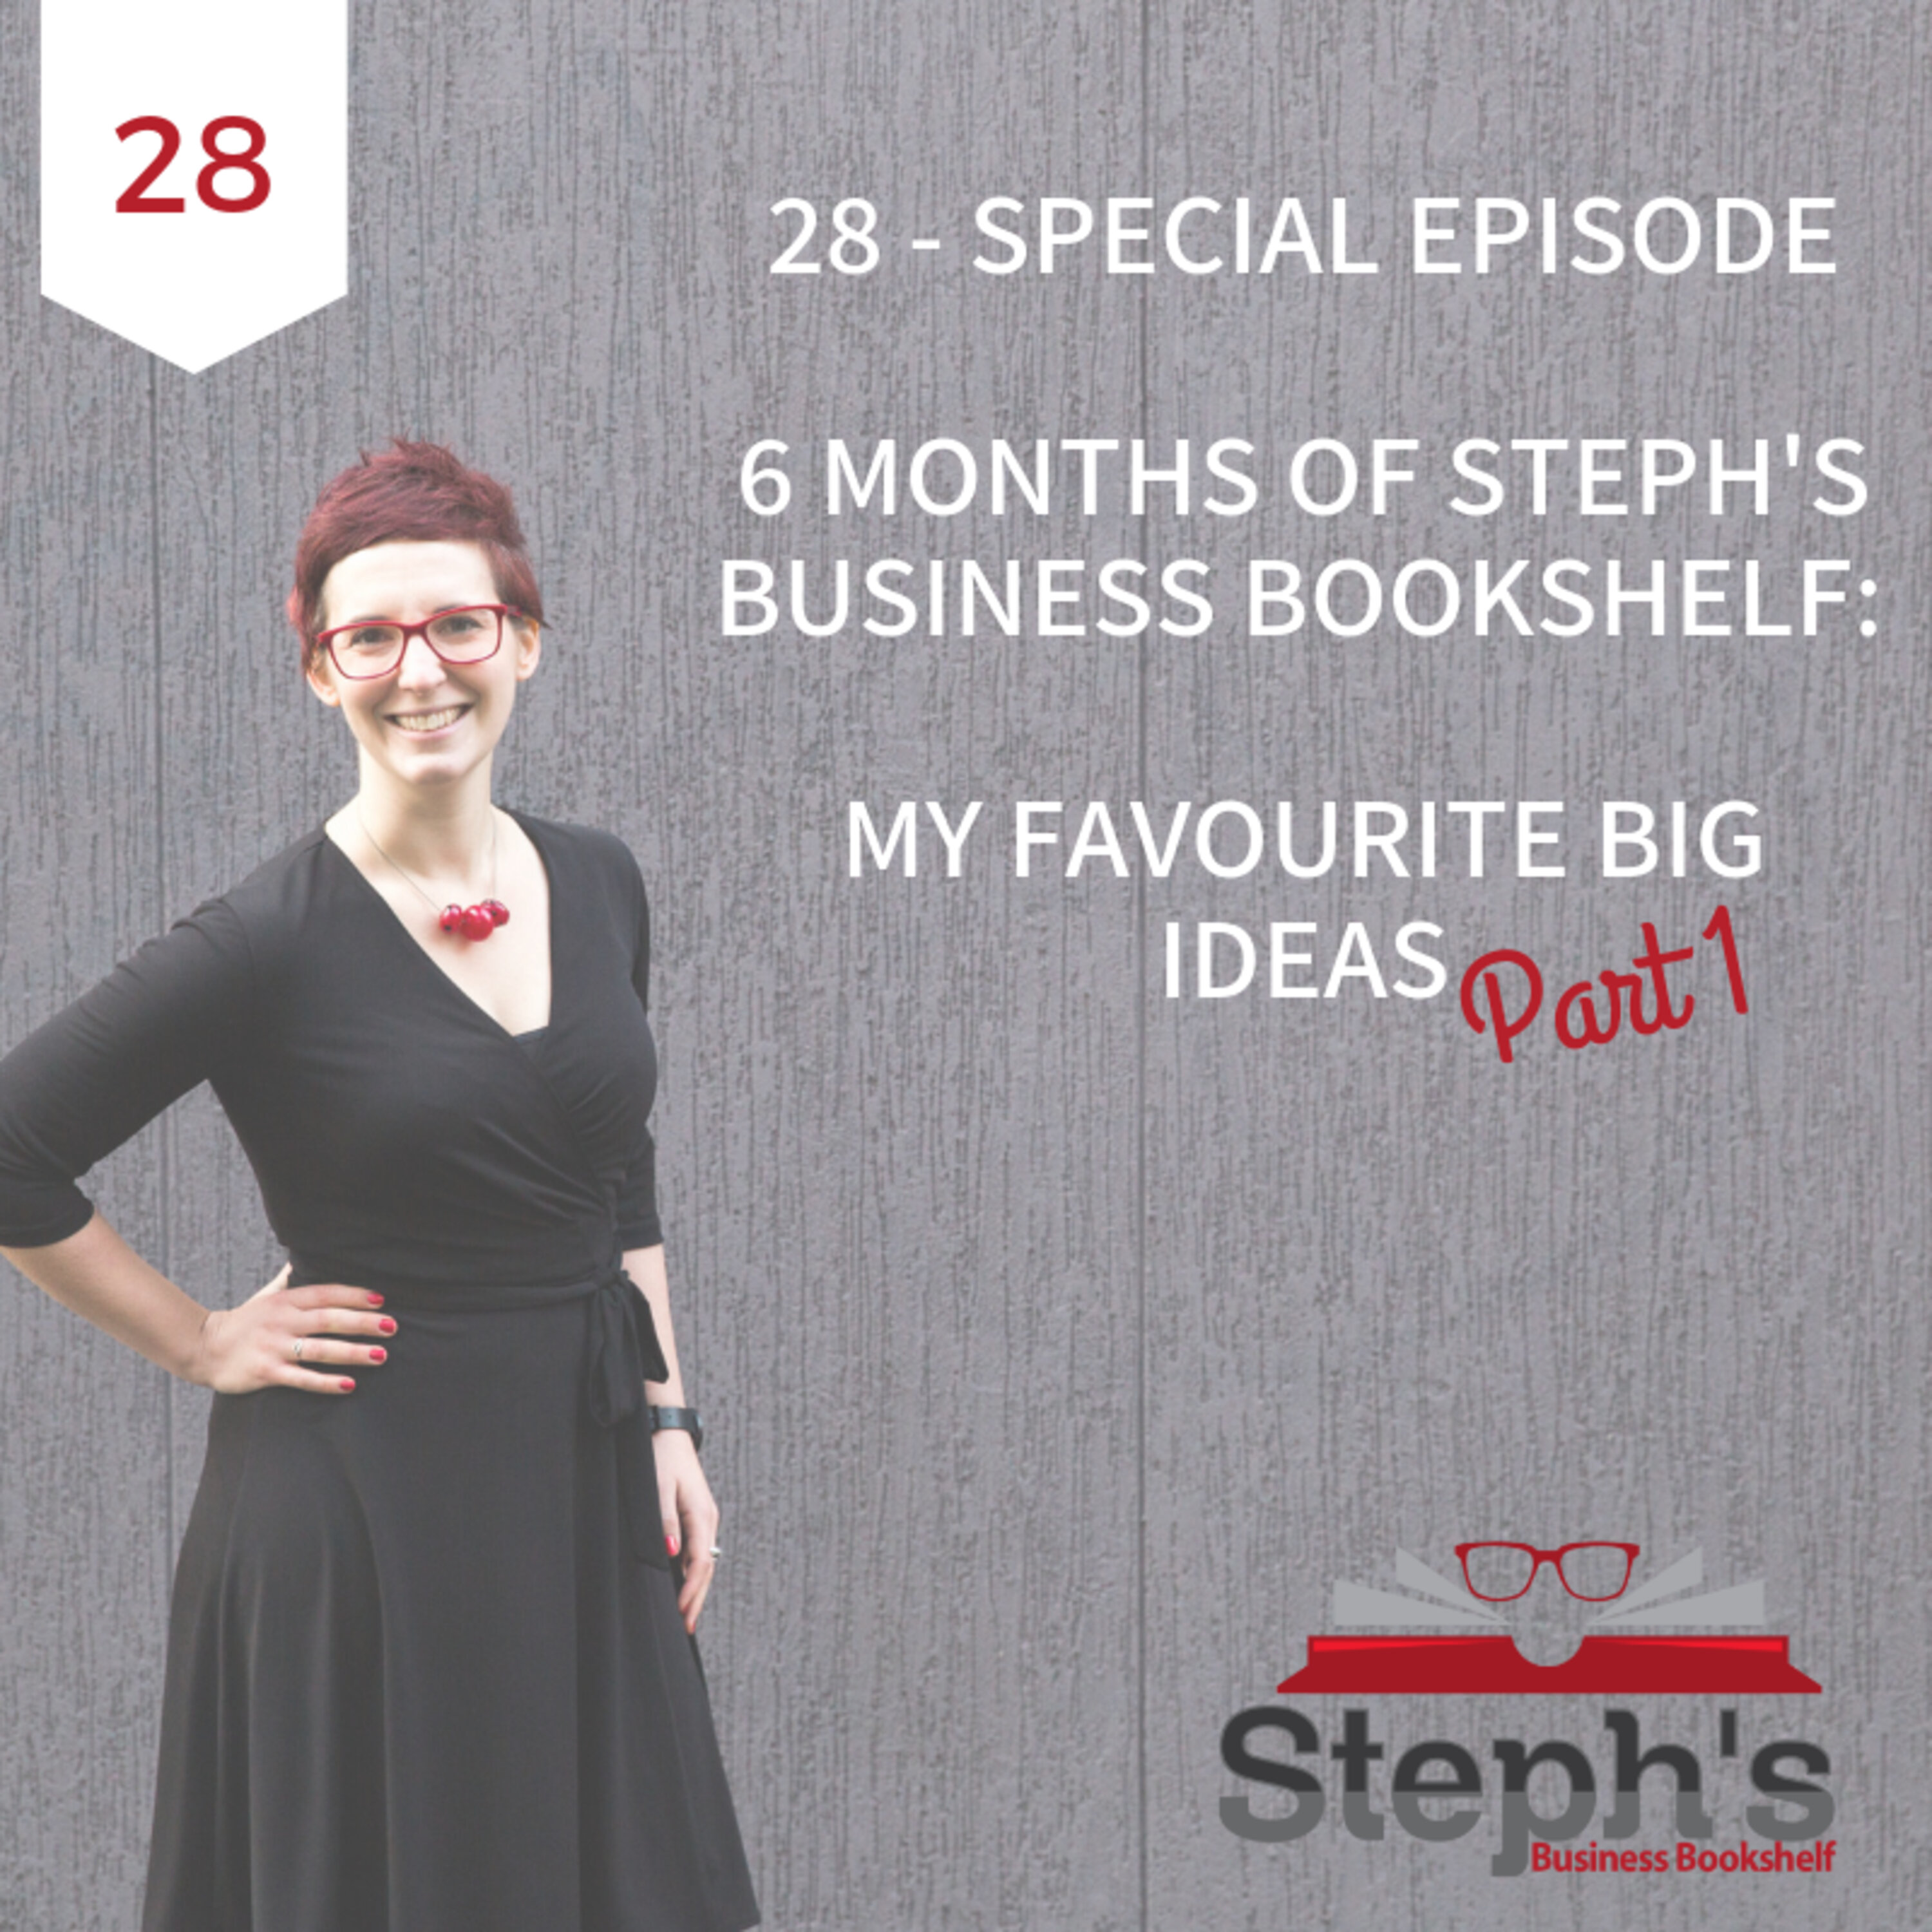 10 Big Ideas About Work From 6 Months of Steph’s Business Bookshelf (part 1) Image